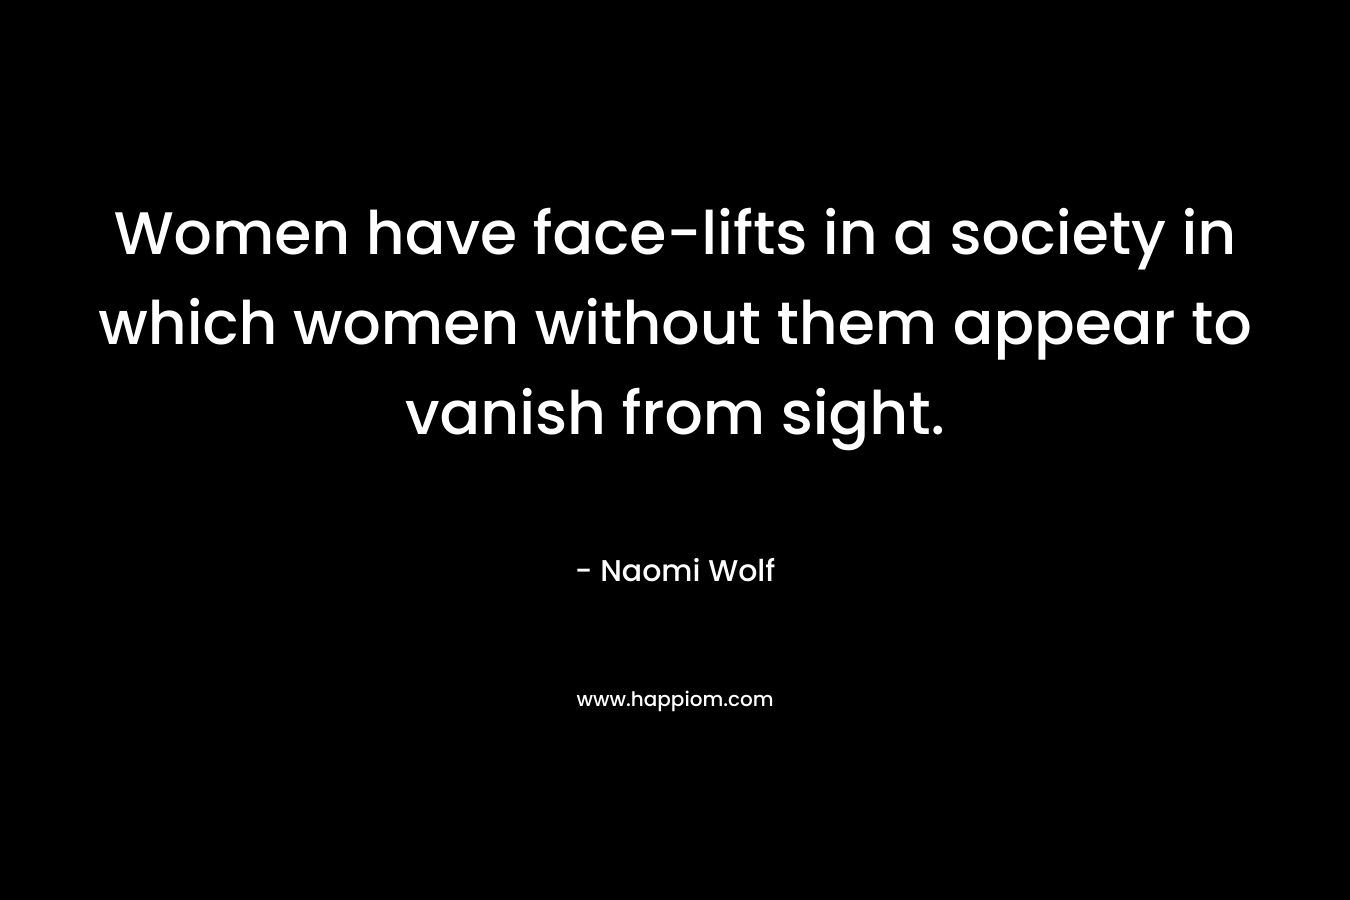 Women have face-lifts in a society in which women without them appear to vanish from sight. – Naomi Wolf